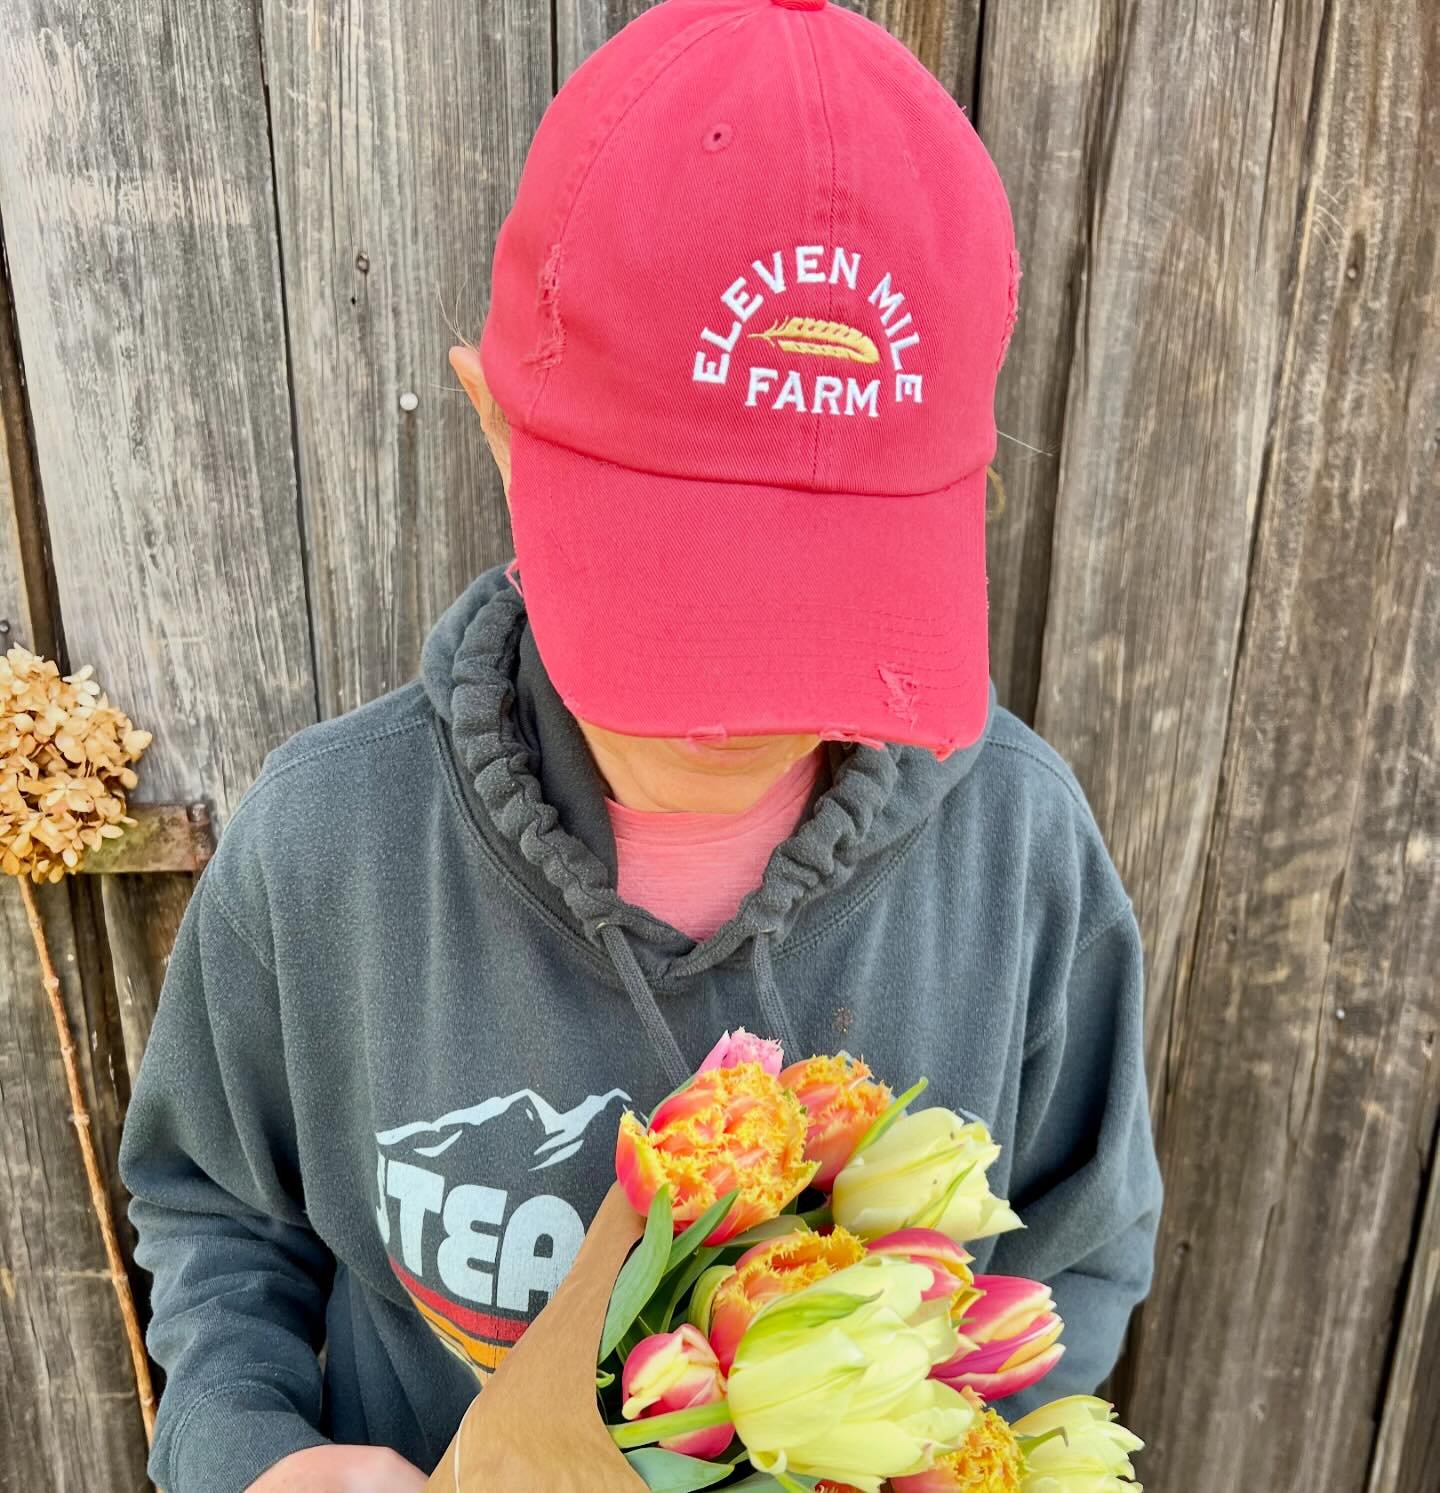 Eleven Mile Farm Merch is here! 
Distressed cotton hats in faded red, blue or green with our logo embroidered on the front and &ldquo;Pittsburgh,PA&rdquo; on the back. 
Visit our website shop to order today!